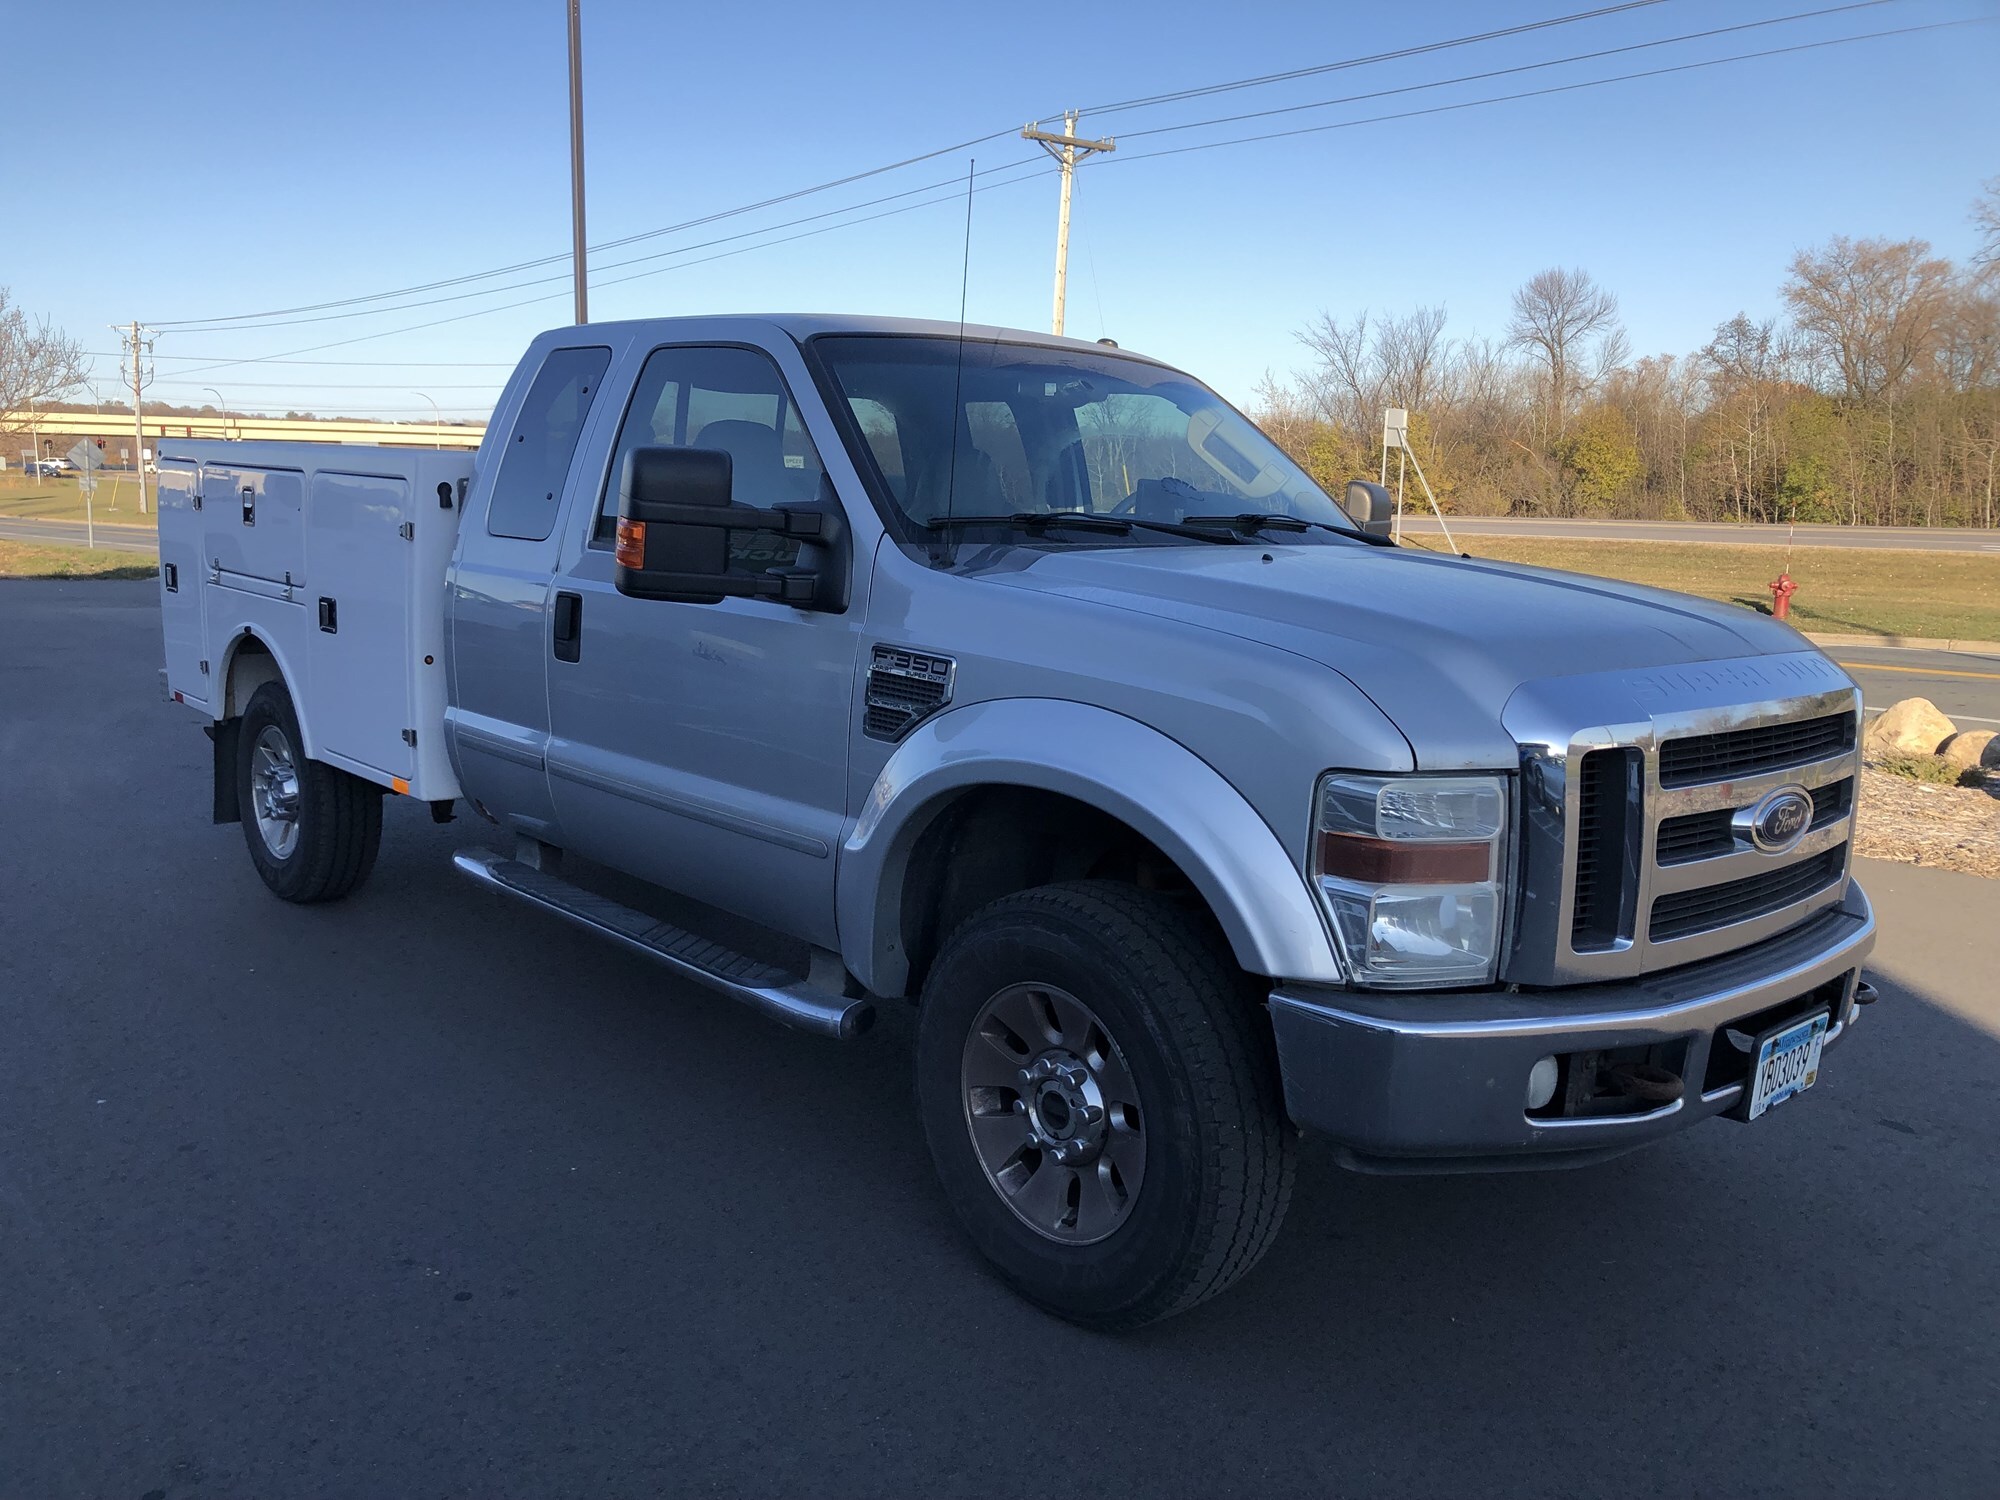 Used 2008 Ford F-350 Super Duty Lariat with VIN 1FTWX31Y88EA61431 for sale in Minneapolis, Minnesota